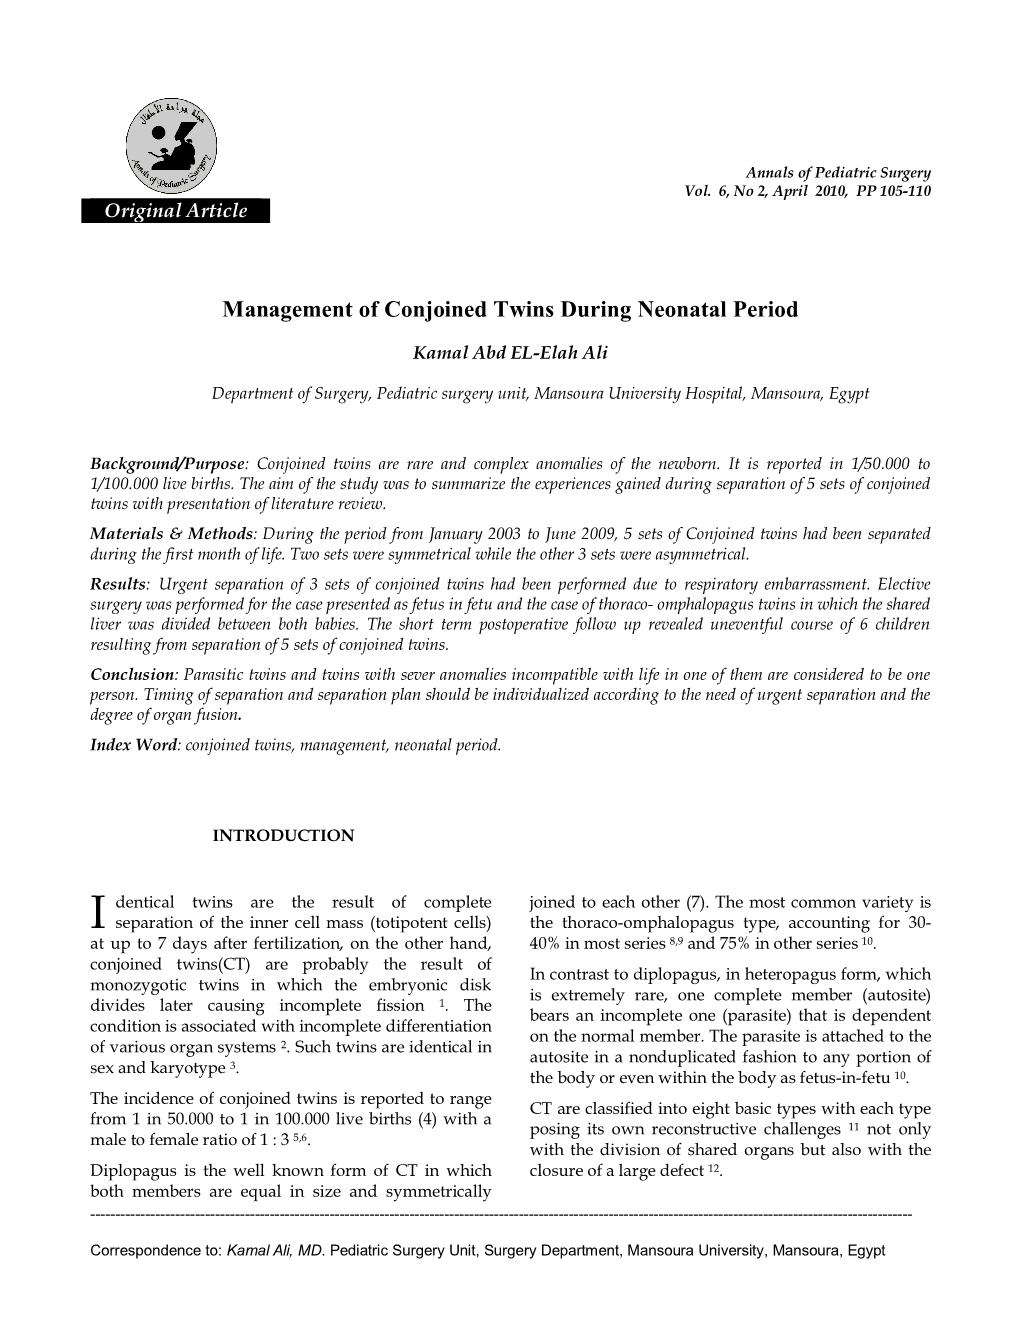 Management of Conjoined Twins During Neonatal Period